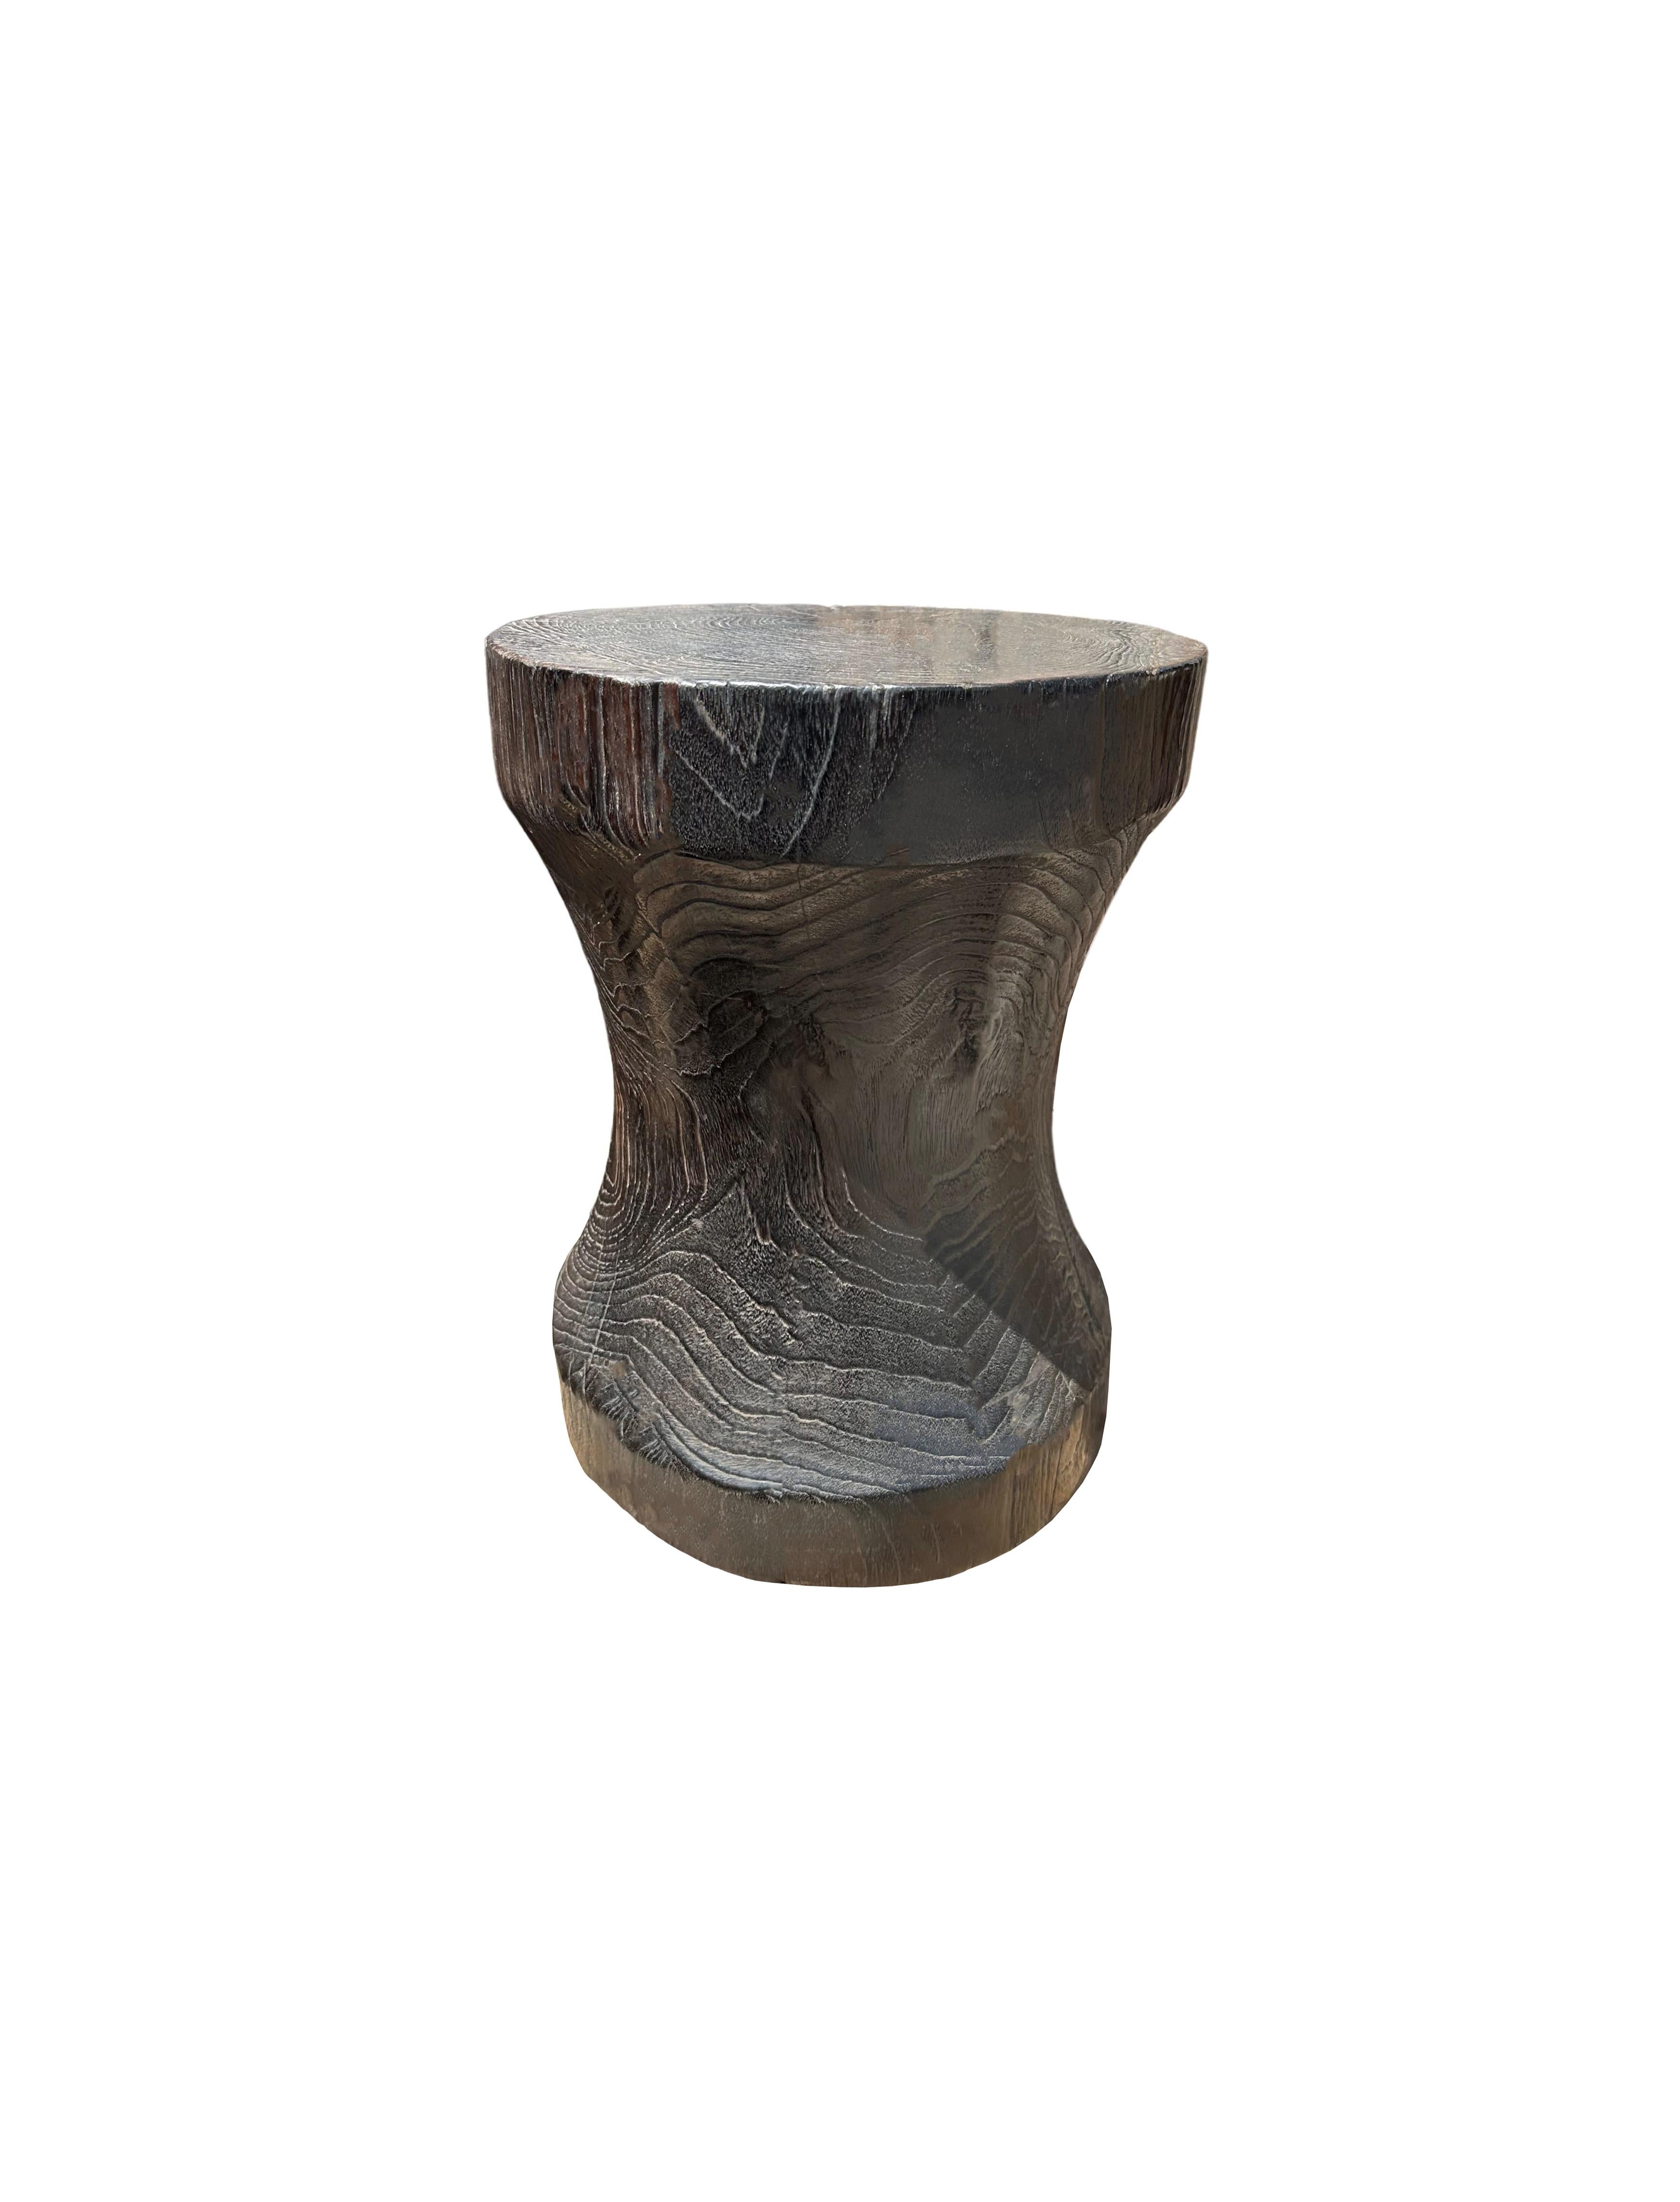 Indonesian Sculptural Side Table Crafted from Teak, Modern Organic, Burnt Finish For Sale